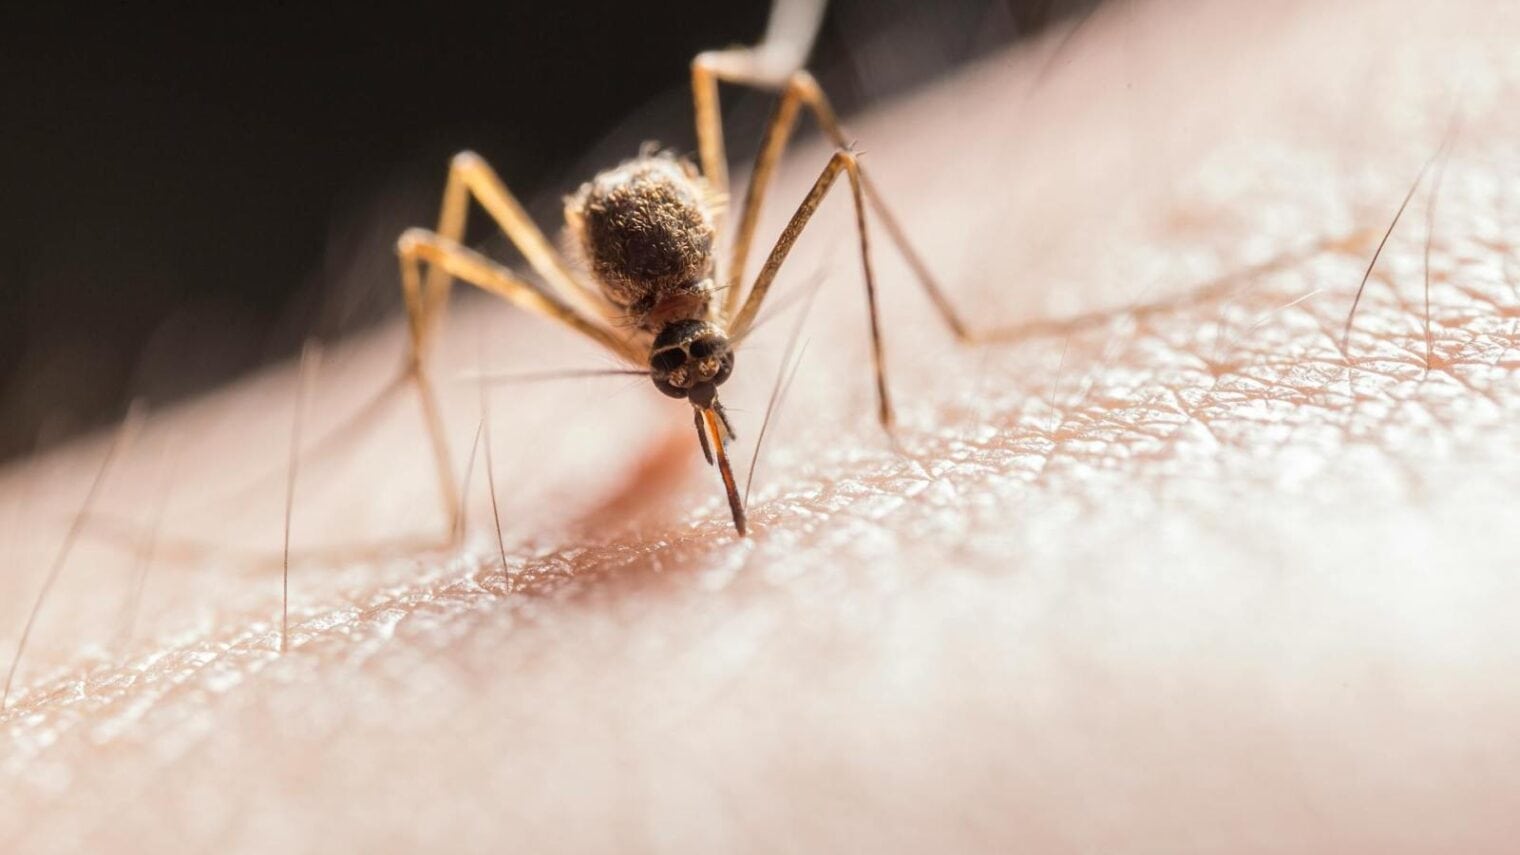 Female mosquitos can carry deadly diseases. Photo by Jimmy Chan on Pexels.com